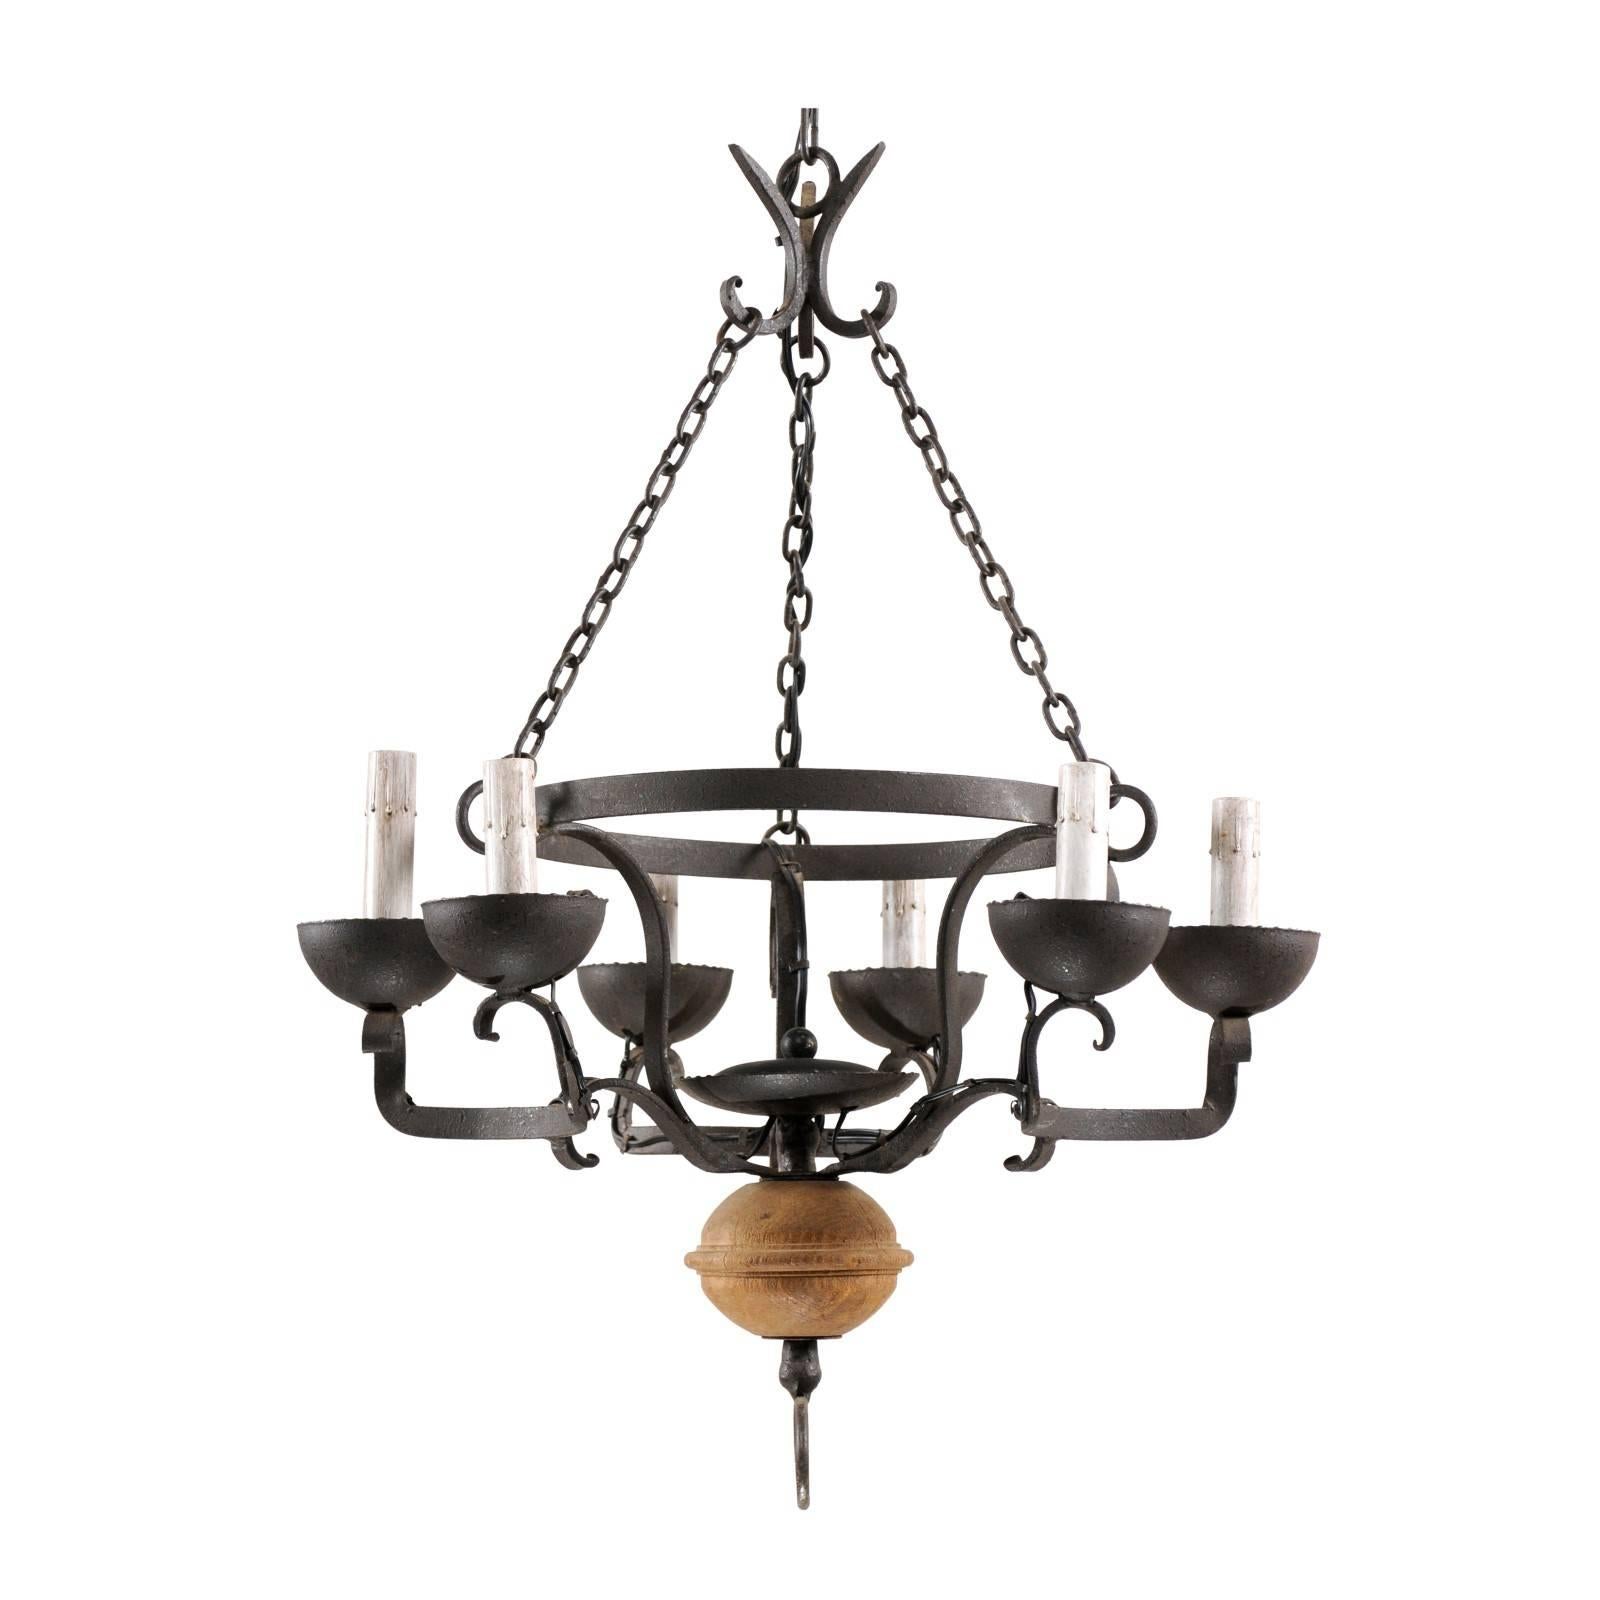 French Midcentury Forged Iron Chandelier with a Carved Wood Sphere Accent